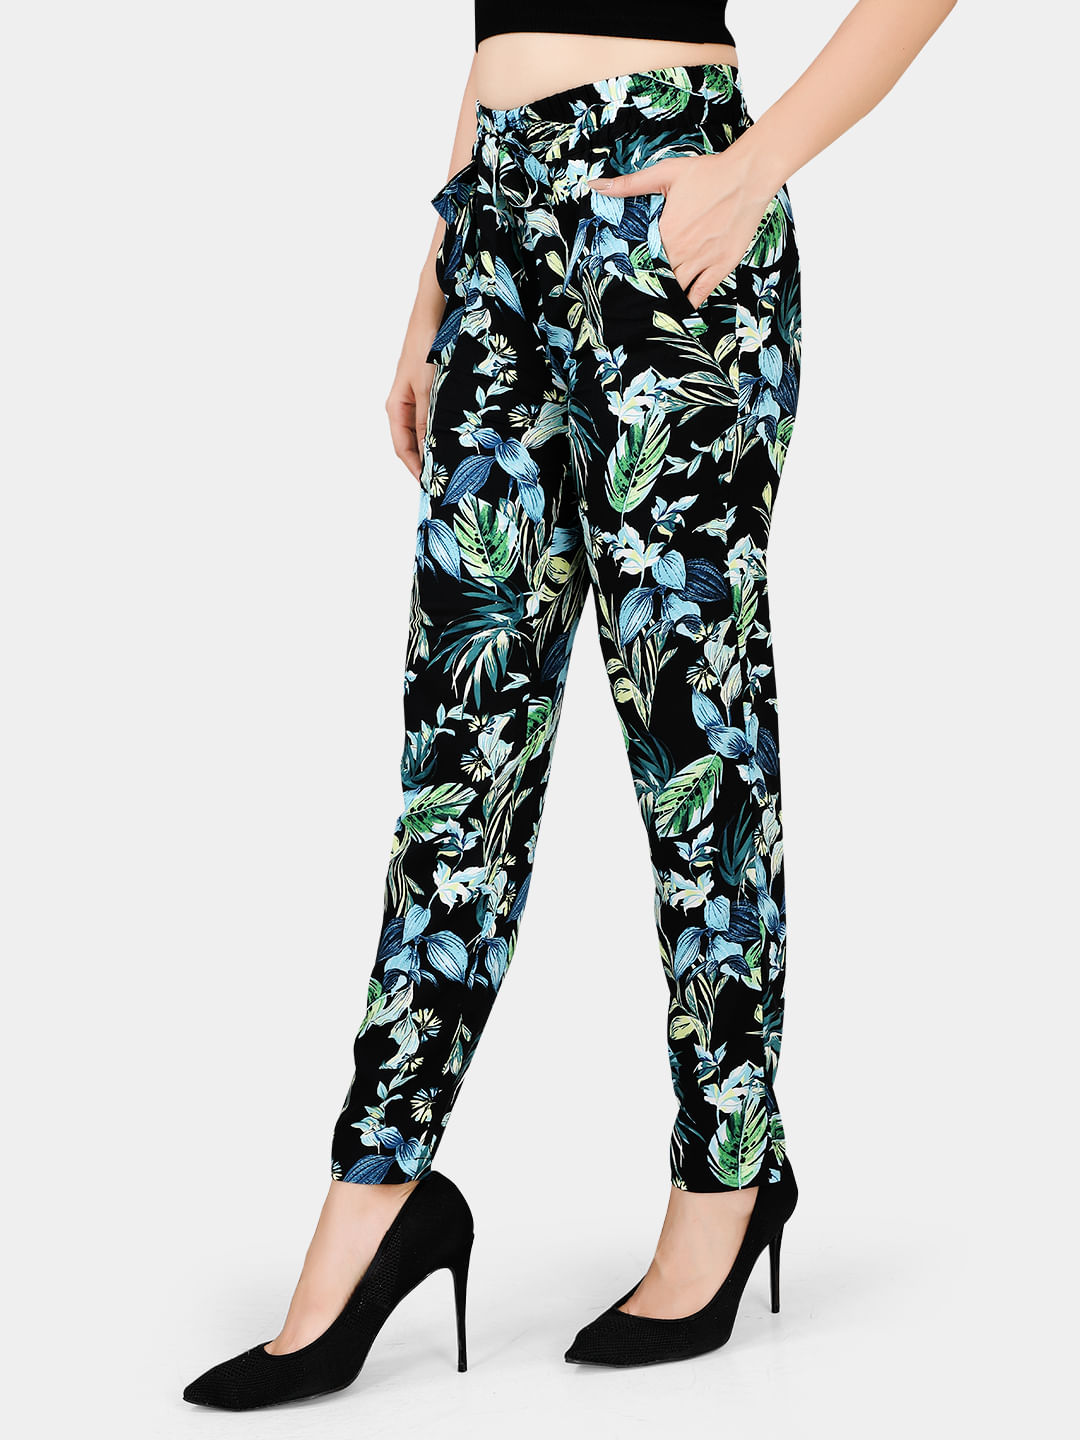 Navy  Blue Floral Trousers  Want That Trend